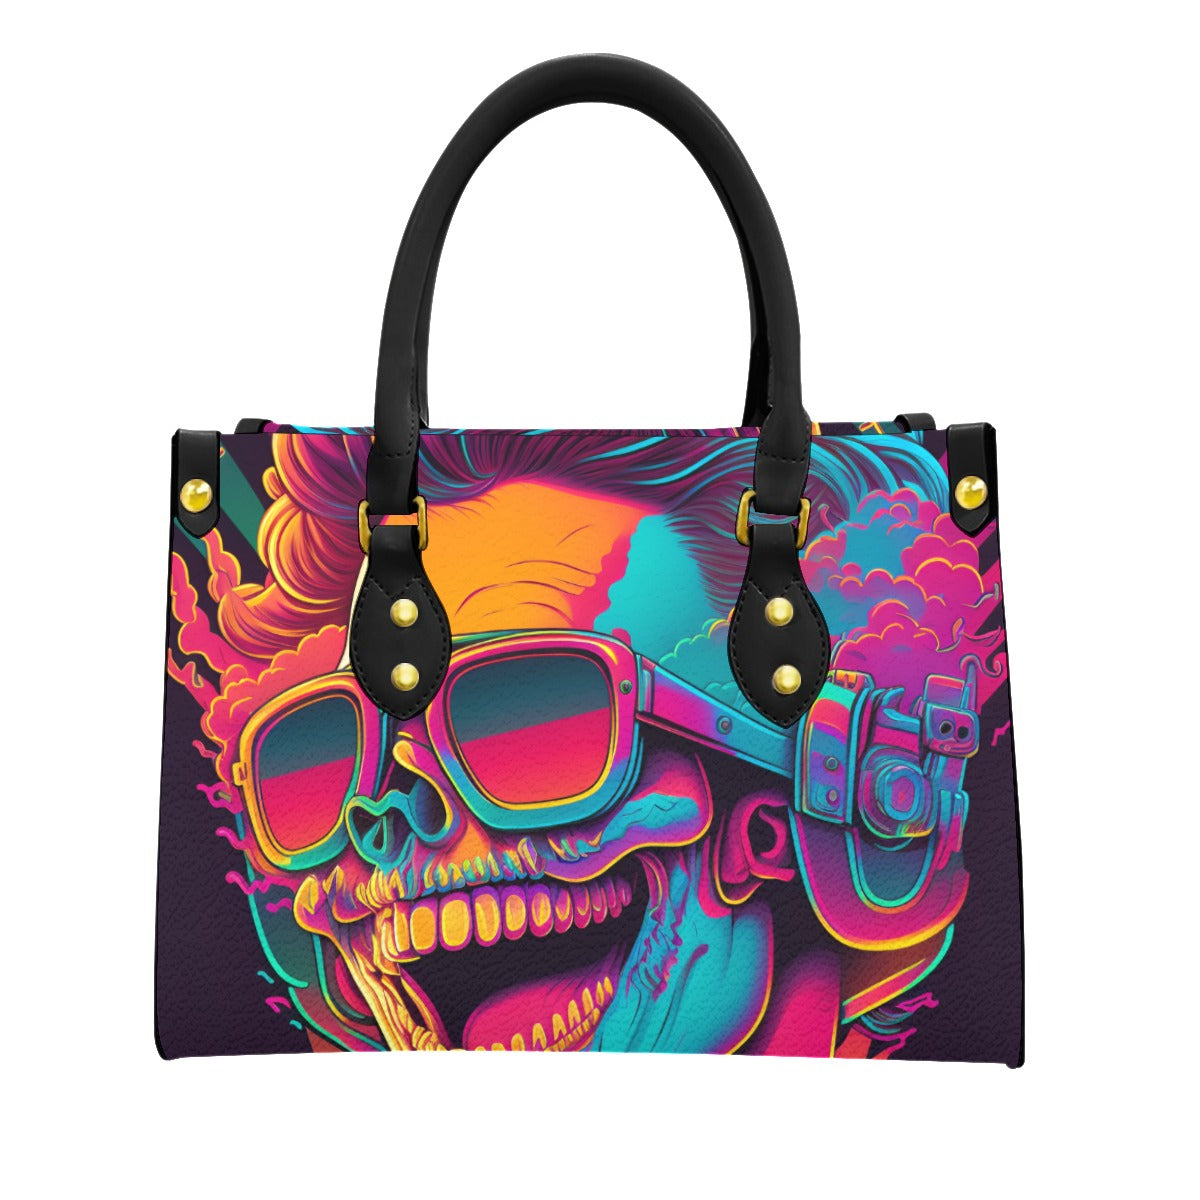 American Psycho Women's Tote Bag With Black Handle